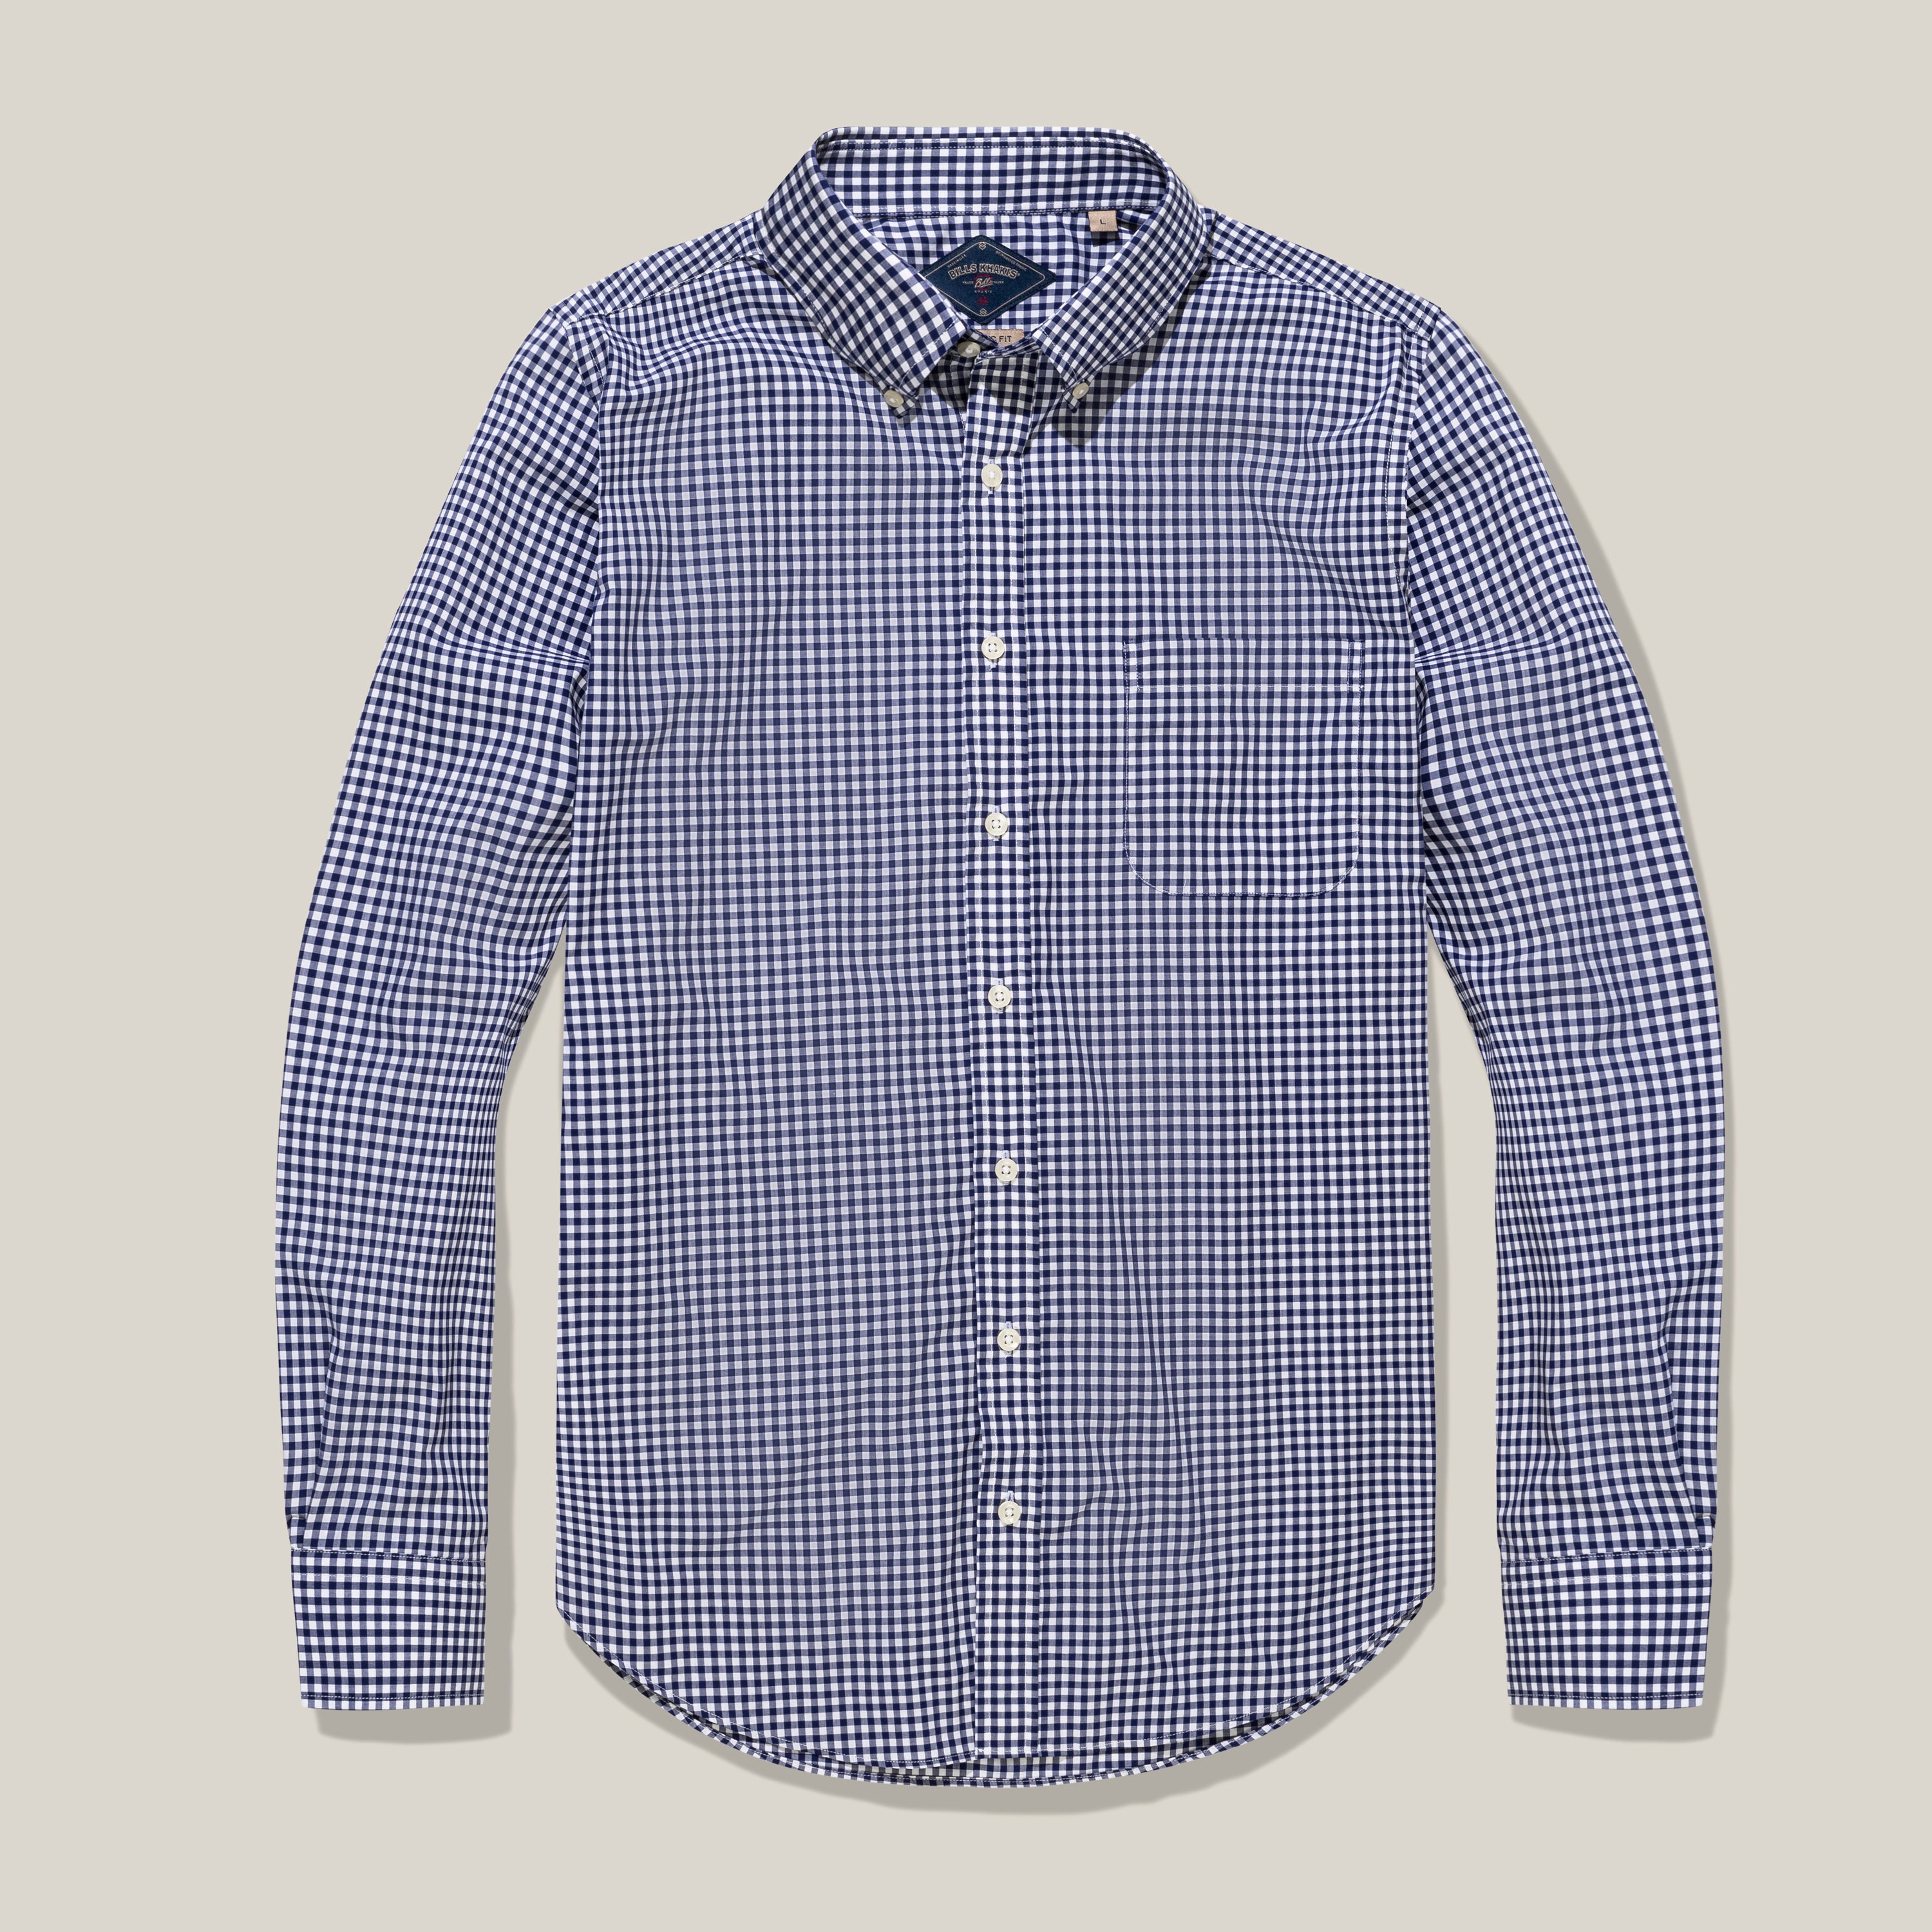 Classic Fit Shirt Navy and White Gingham Oxford